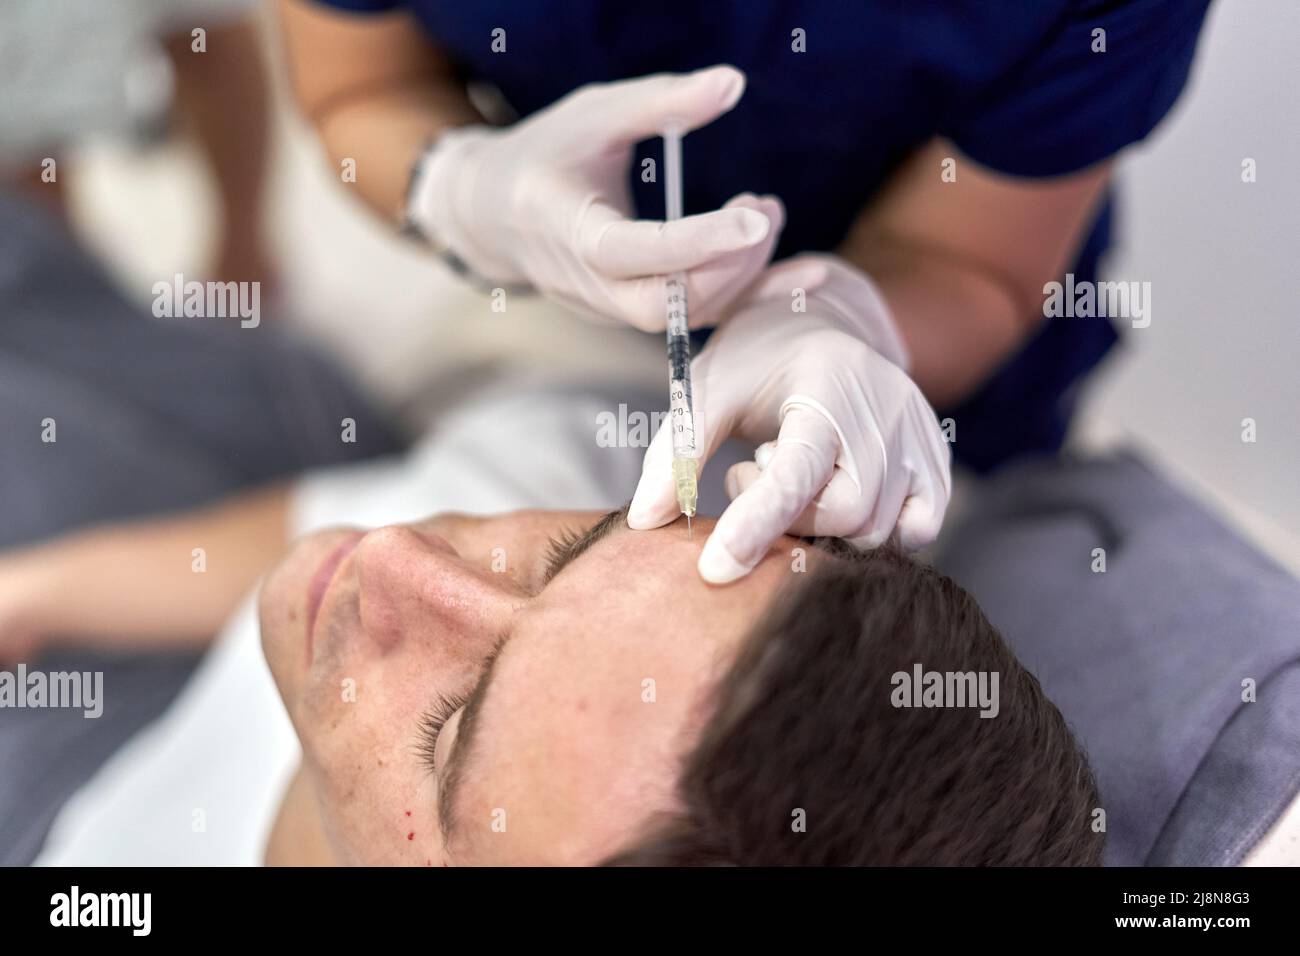 Patient getting a shot of botox in the forehead Stock Photo